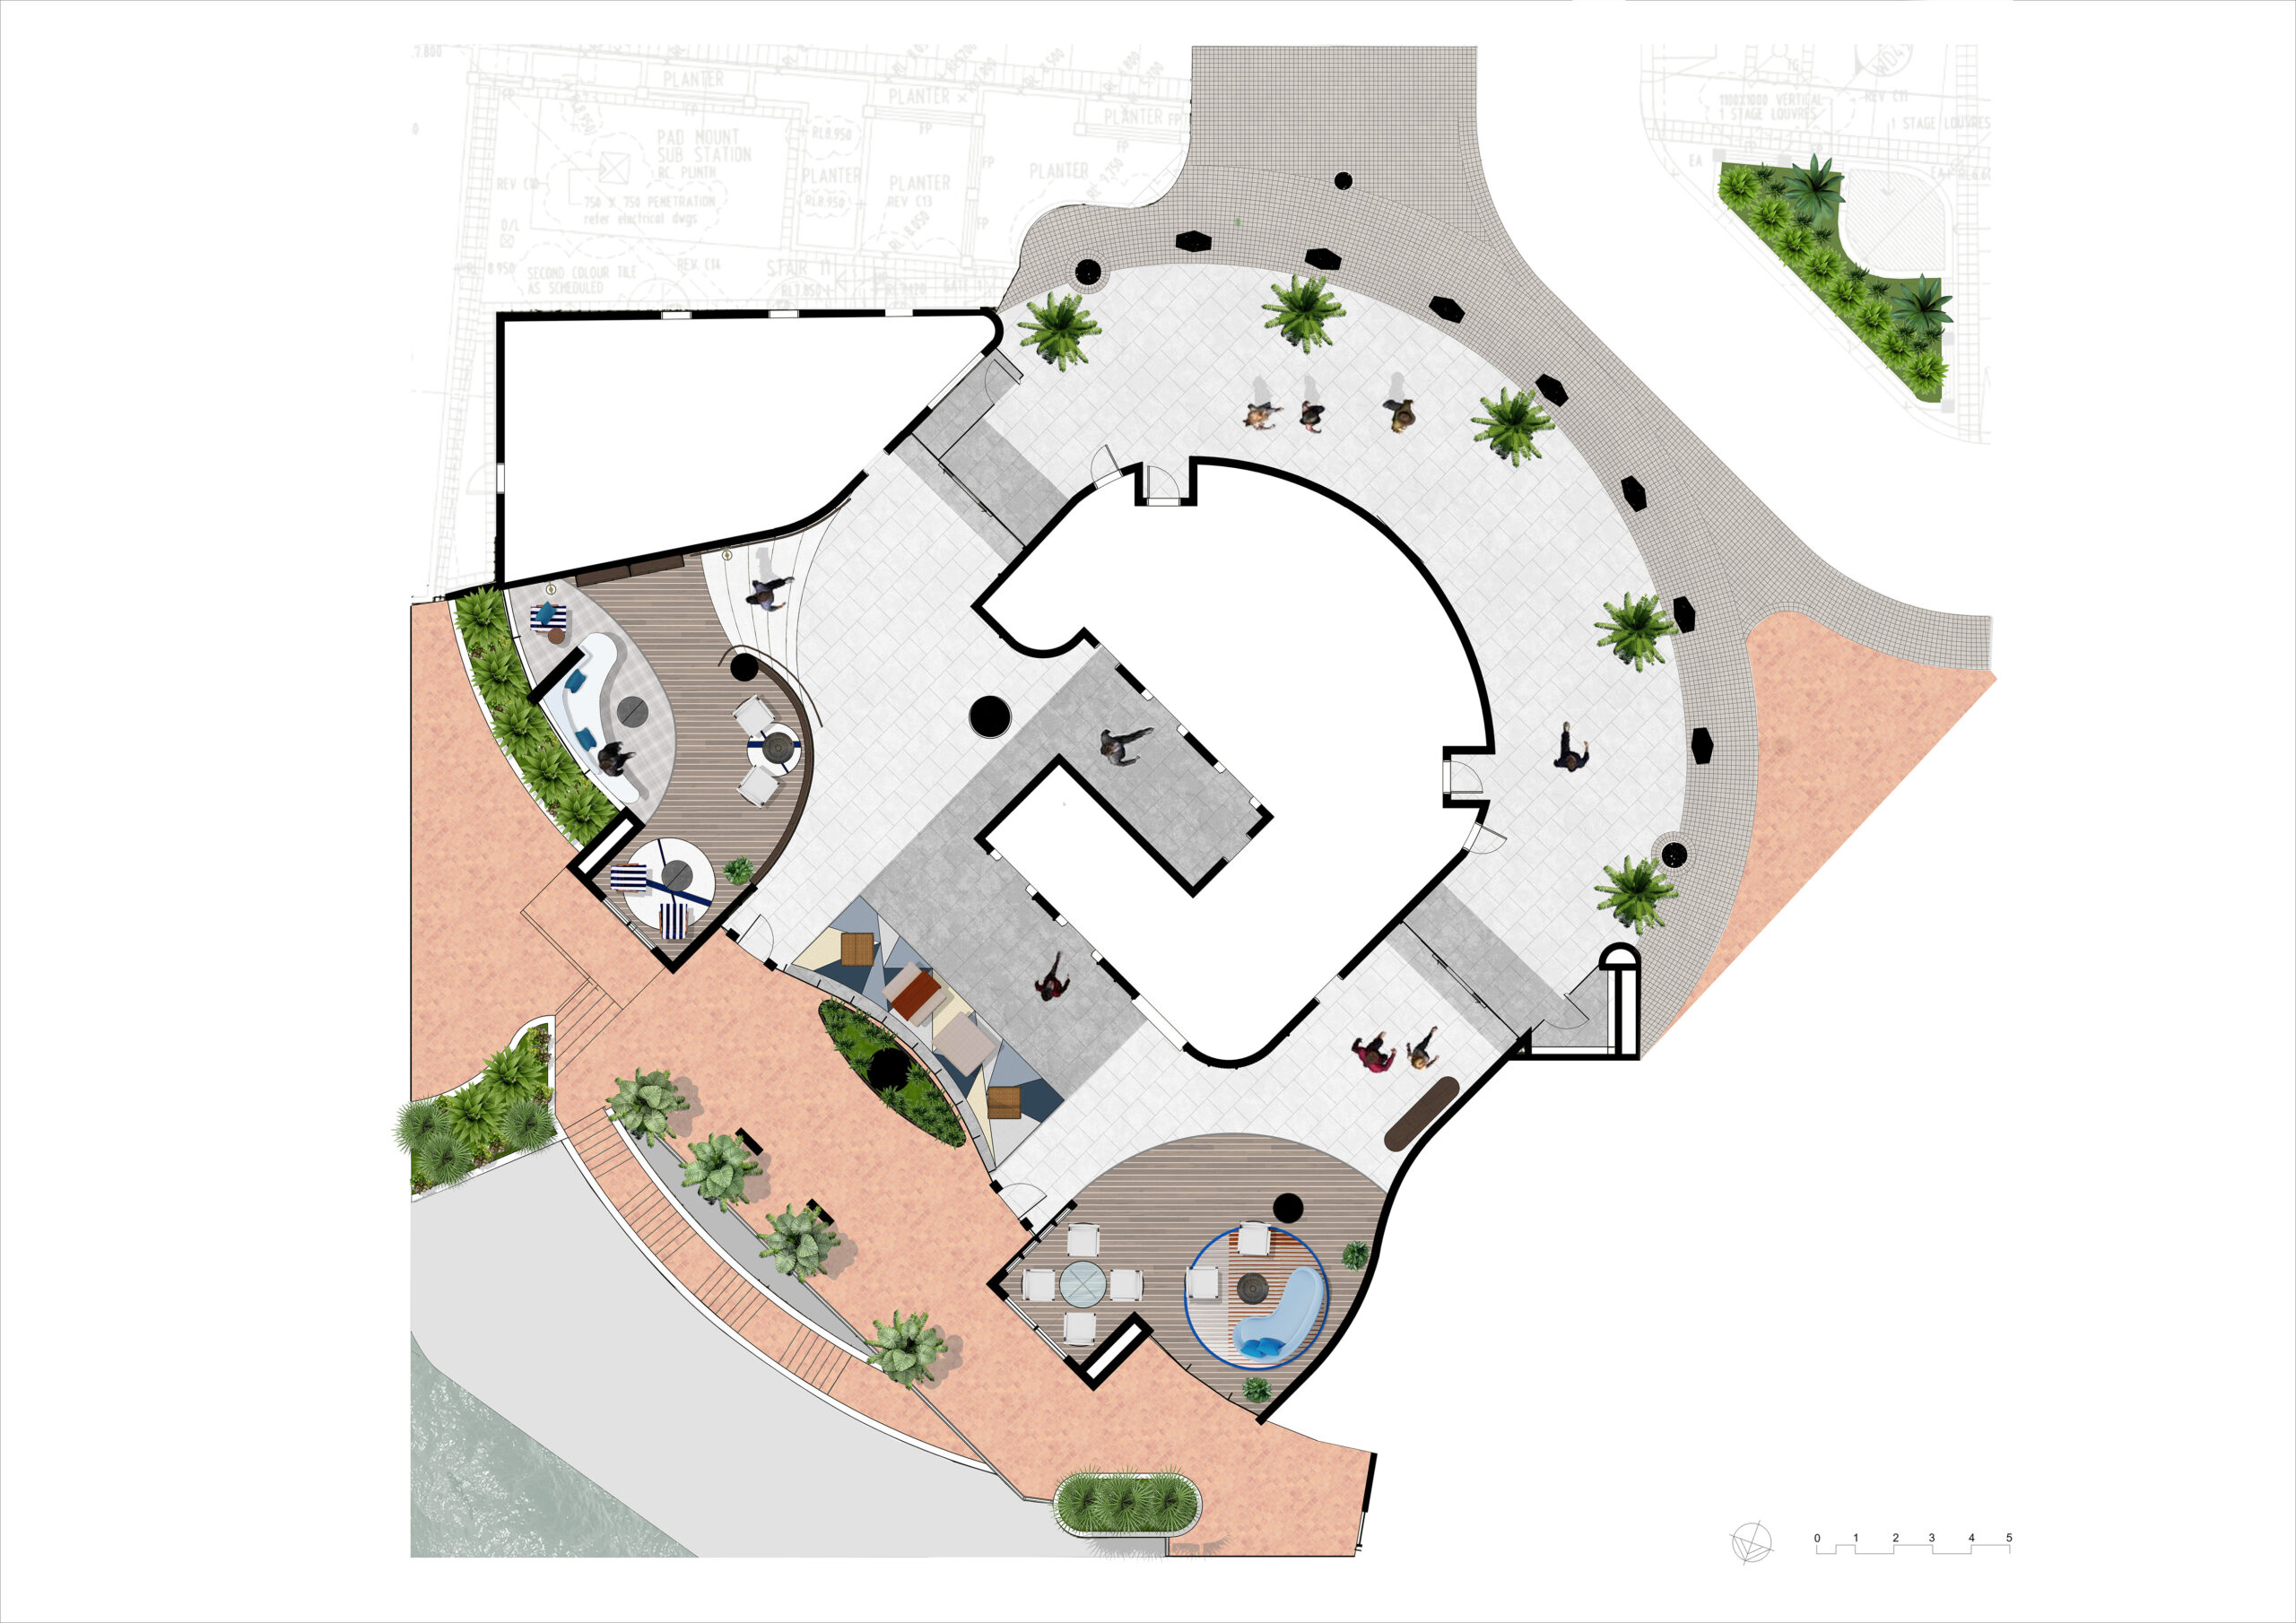 Floor plan of a residential apartment lobby showcasing reading spaces, indoor and outdoor areas, a porte cochere, and a planting area.